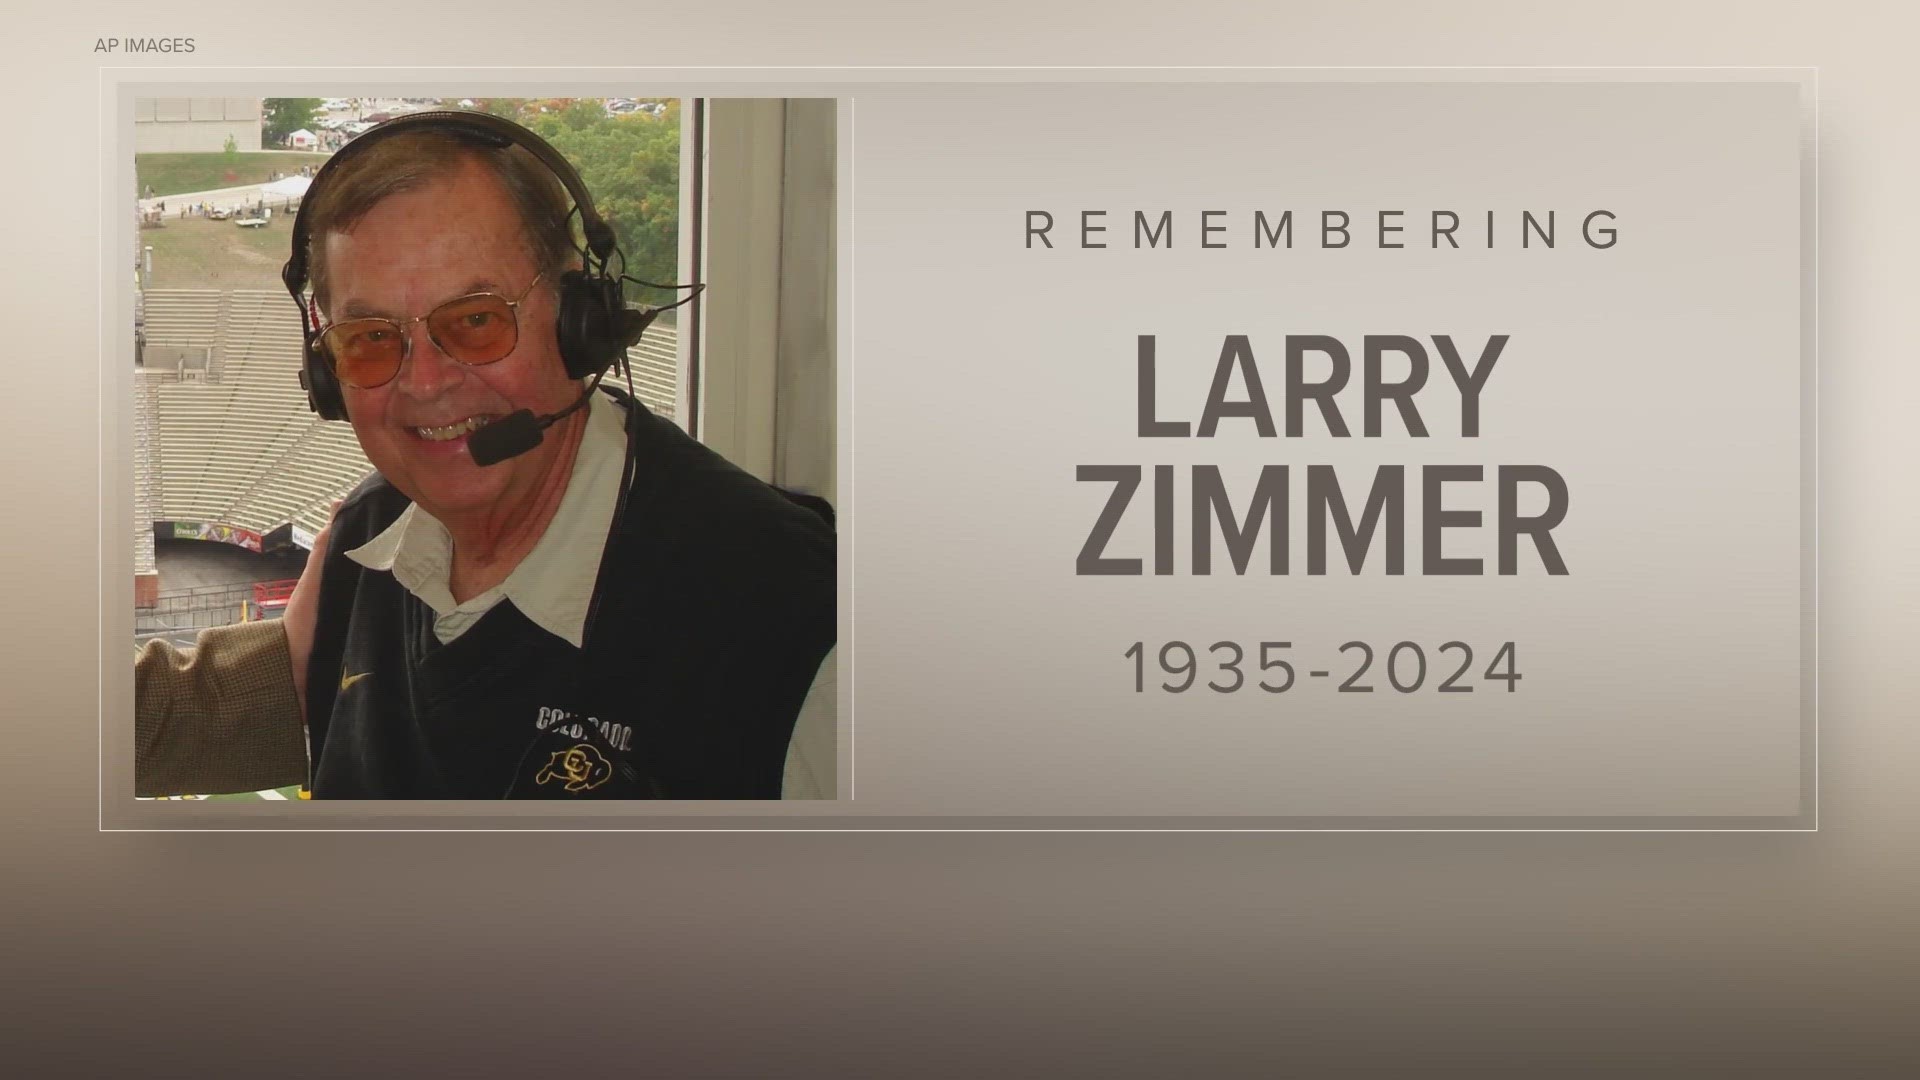 Larry Zimmer’s voice became the “sound of sports” in Colorado for decades. His play-by-play calls still bring chills to Broncos and Buffs fans.